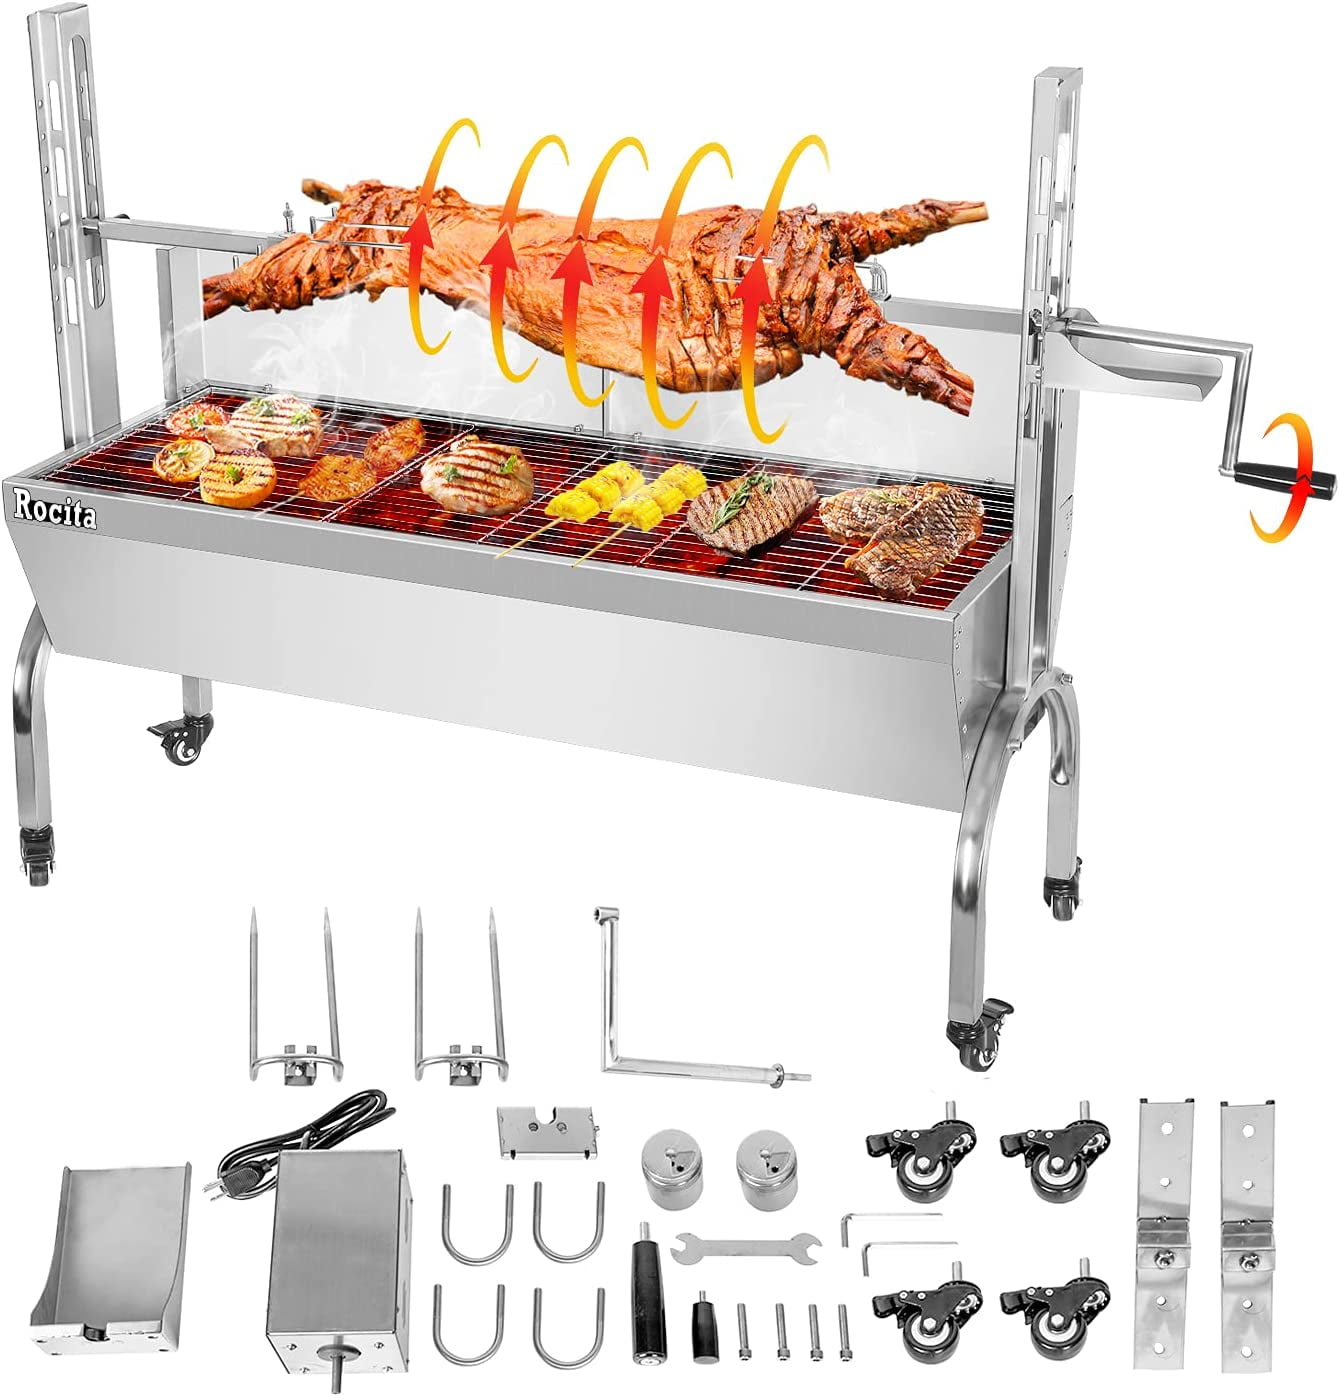 Grill Roaster, 176lbs Charcoal Grill Pig Lamb Spit Roaster Outdoor BBQ Grill with 25W Motor, Wind Baffle and Hand Crank - Walmart.com